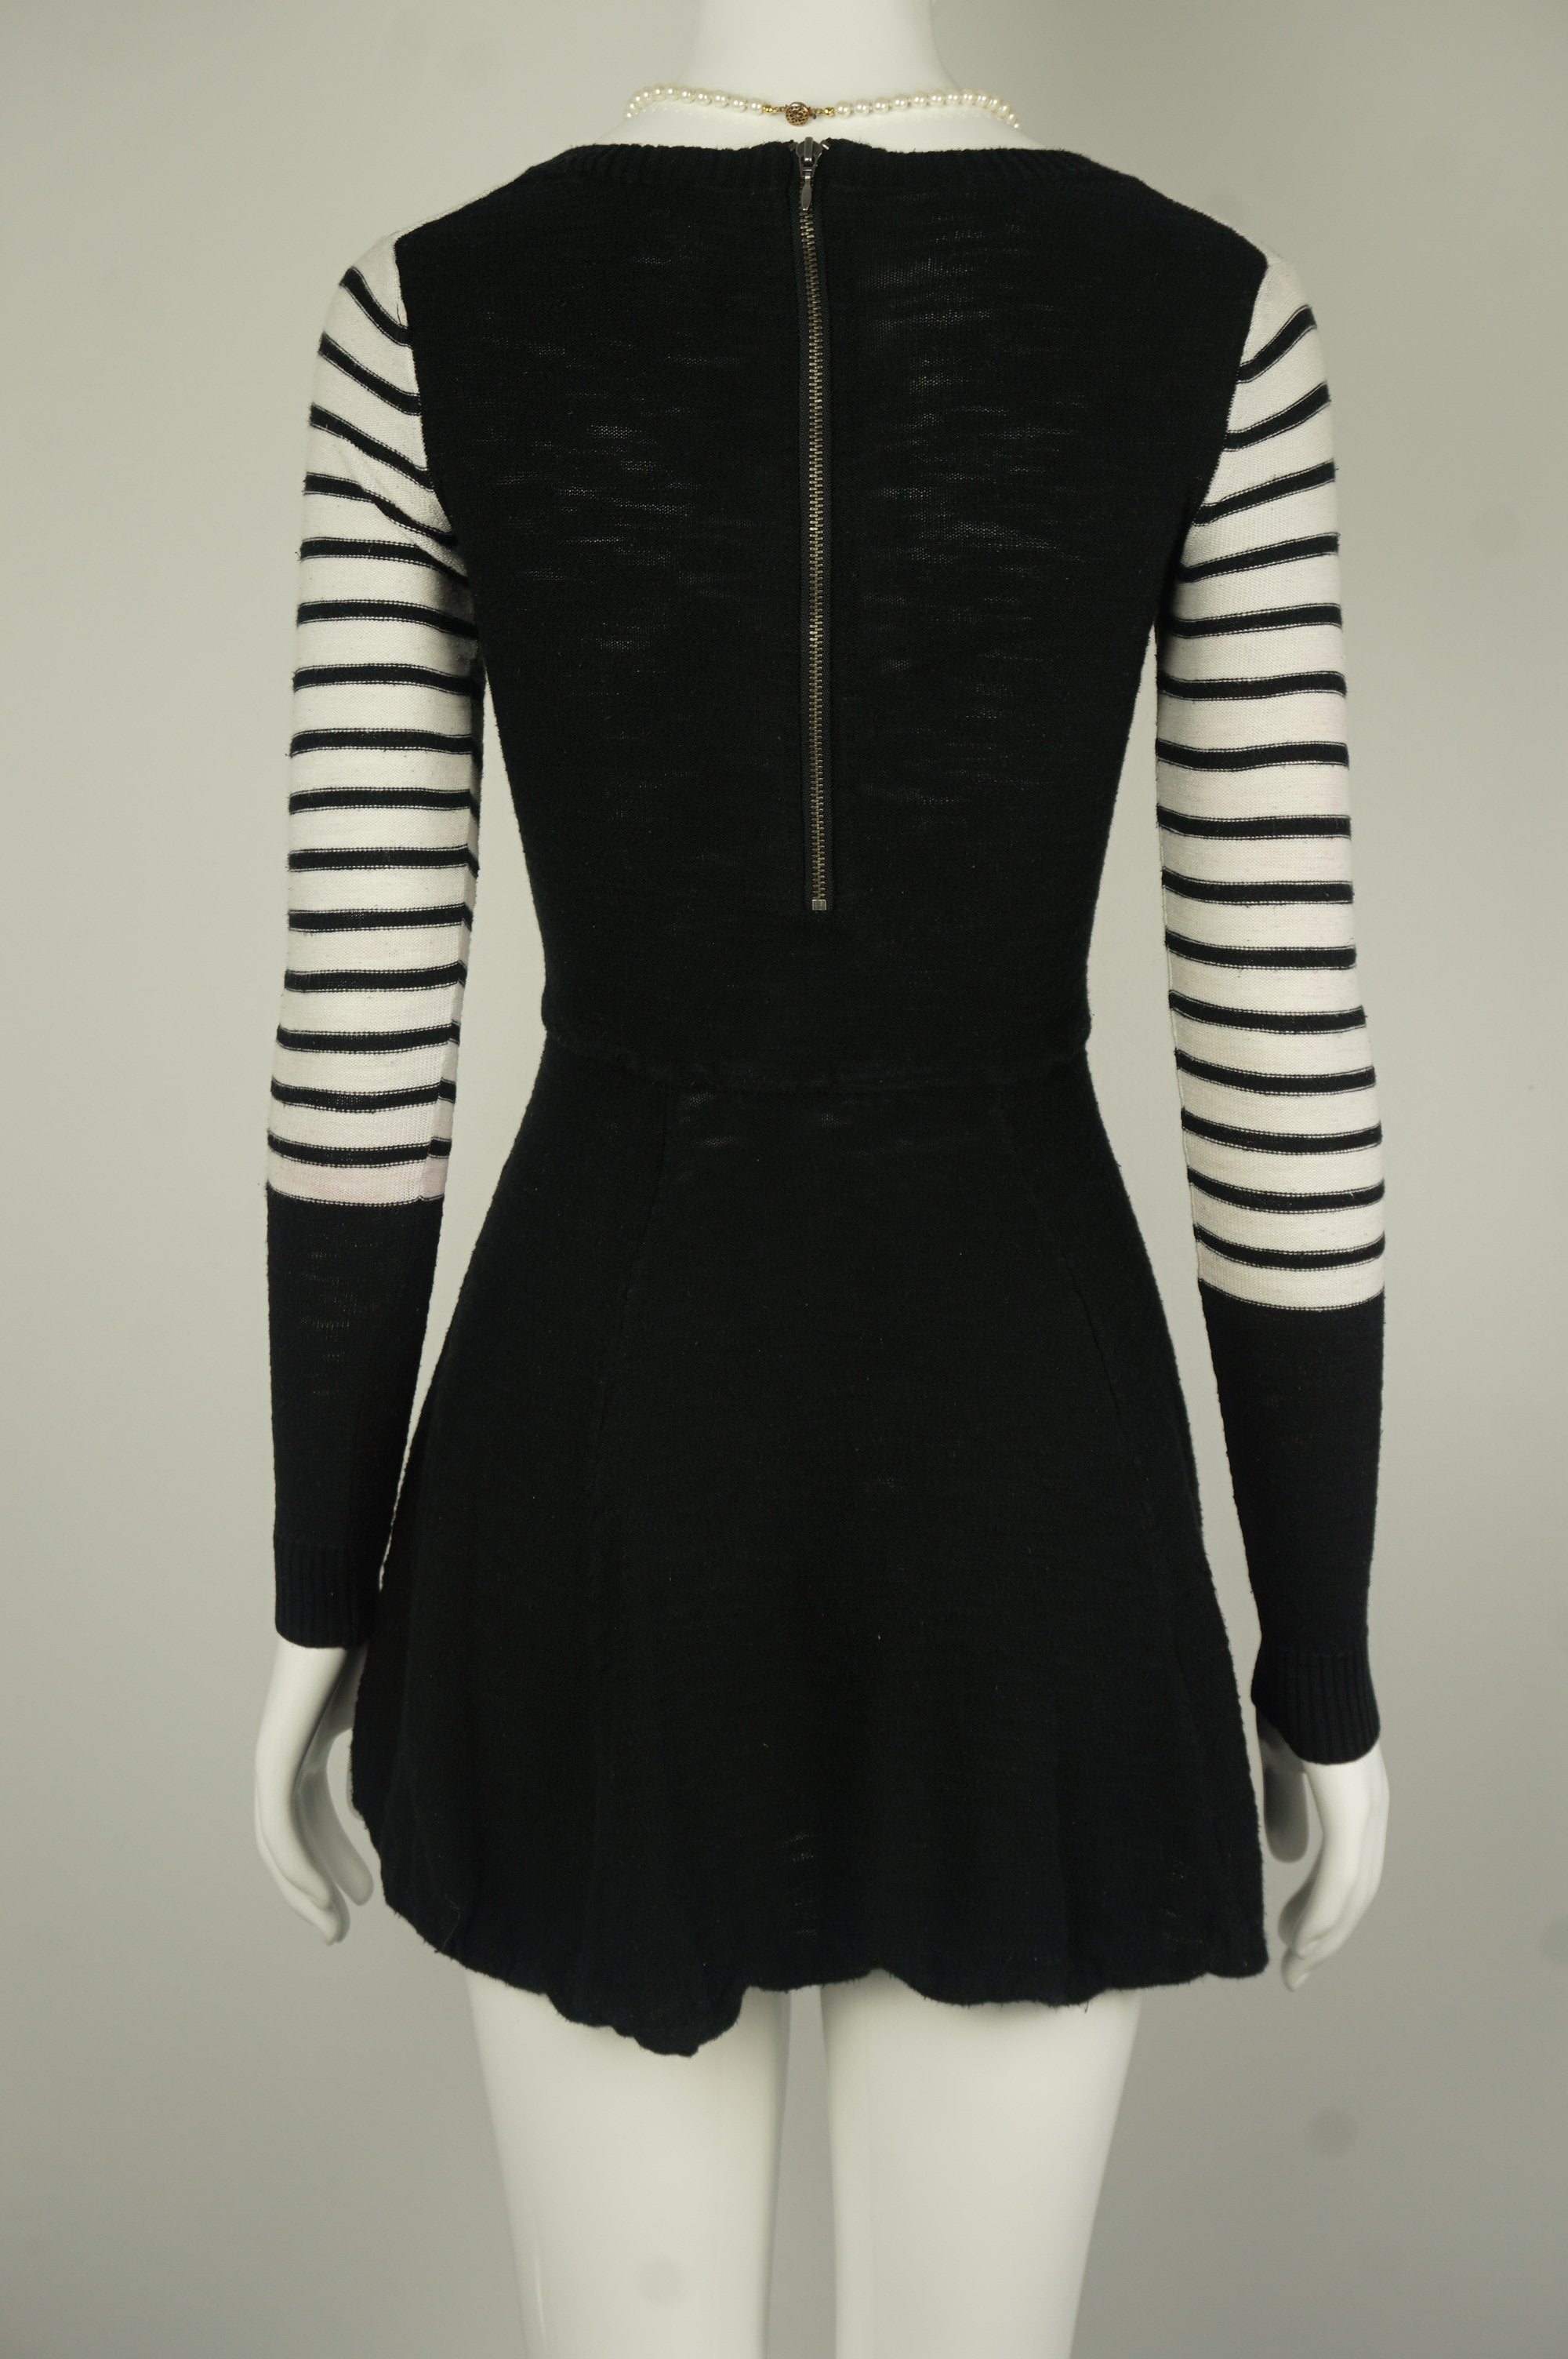 Express Zipper Back Black and White Striped Flare Dress with Long Sleeves, Stripes go with everything and they definitely work well with this black and white business casual winter dress. , Black, White, Warm and stretchy material, women's Dresses & Skirts, women's Black, White Dresses & Skirts, Express women's Dresses & Skirts, Black and White striped flare dress, long sleeves mini dress, warm winter dress